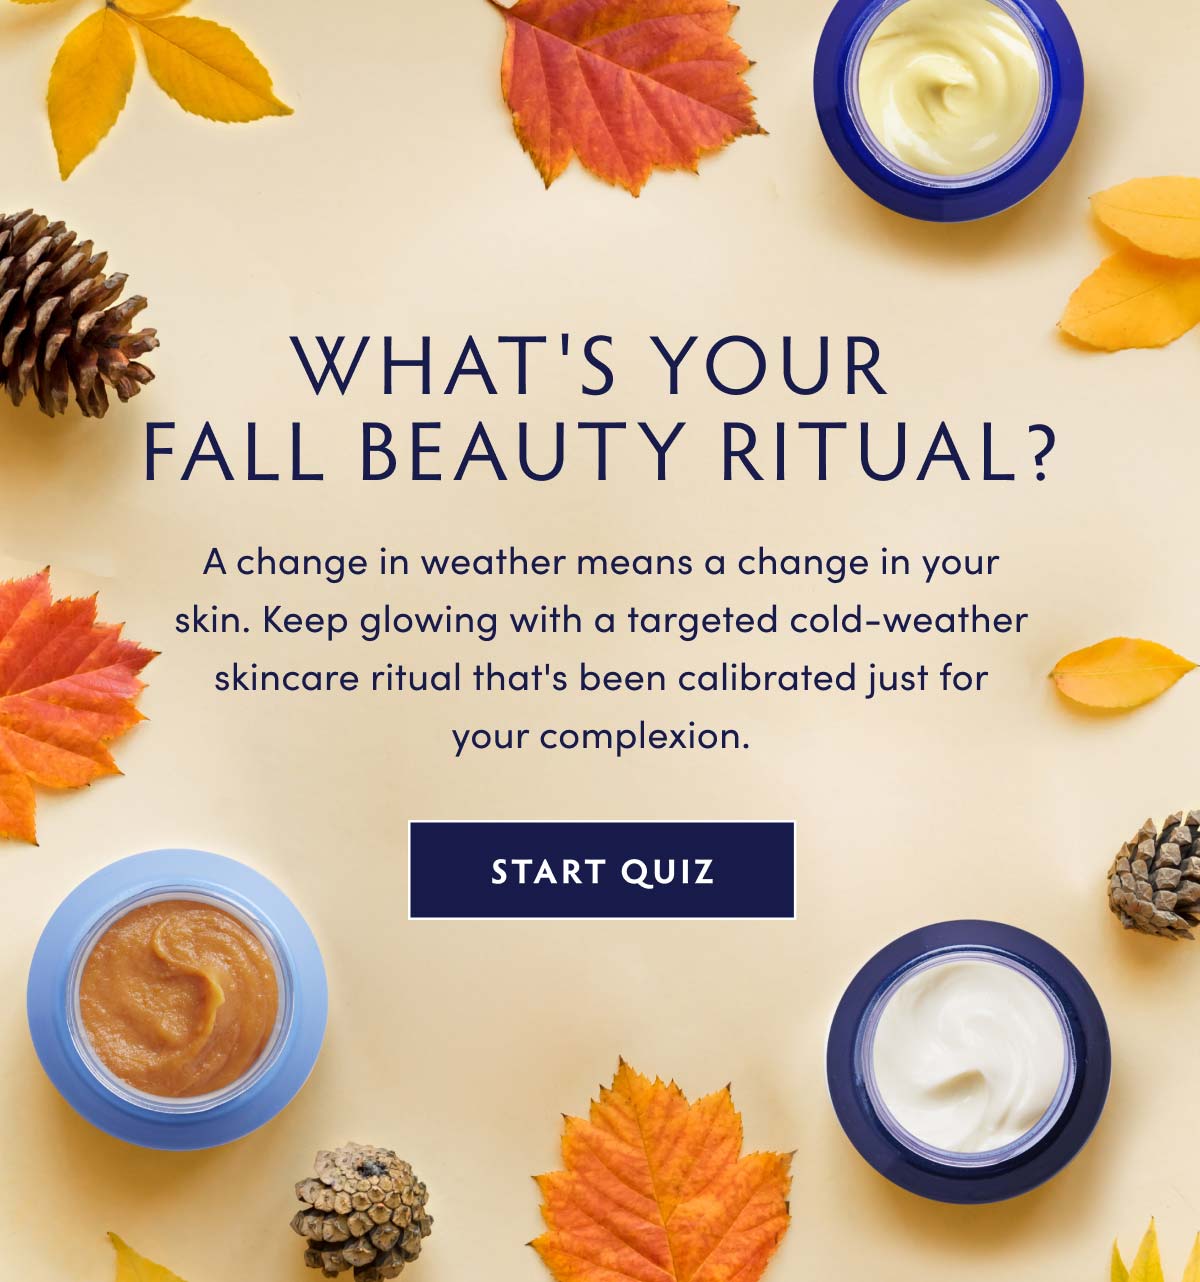 What's Your Fall Beauty Ritual? A change in weather means a change in your skin. Keep glowing with a targeted cold-weather skincare ritual that's been calibrated just for your complexion. GET ANSWERS: TAKE OUR SKINCARE QUIZ NOW  WHAT'S YOUR - FALL BEAUTY RITUAL? A change in weather means a change in your skin. Keep glowing with a targeted cold-weather skincare ritual that's been calibrated just for your complexion. START QUIZ 